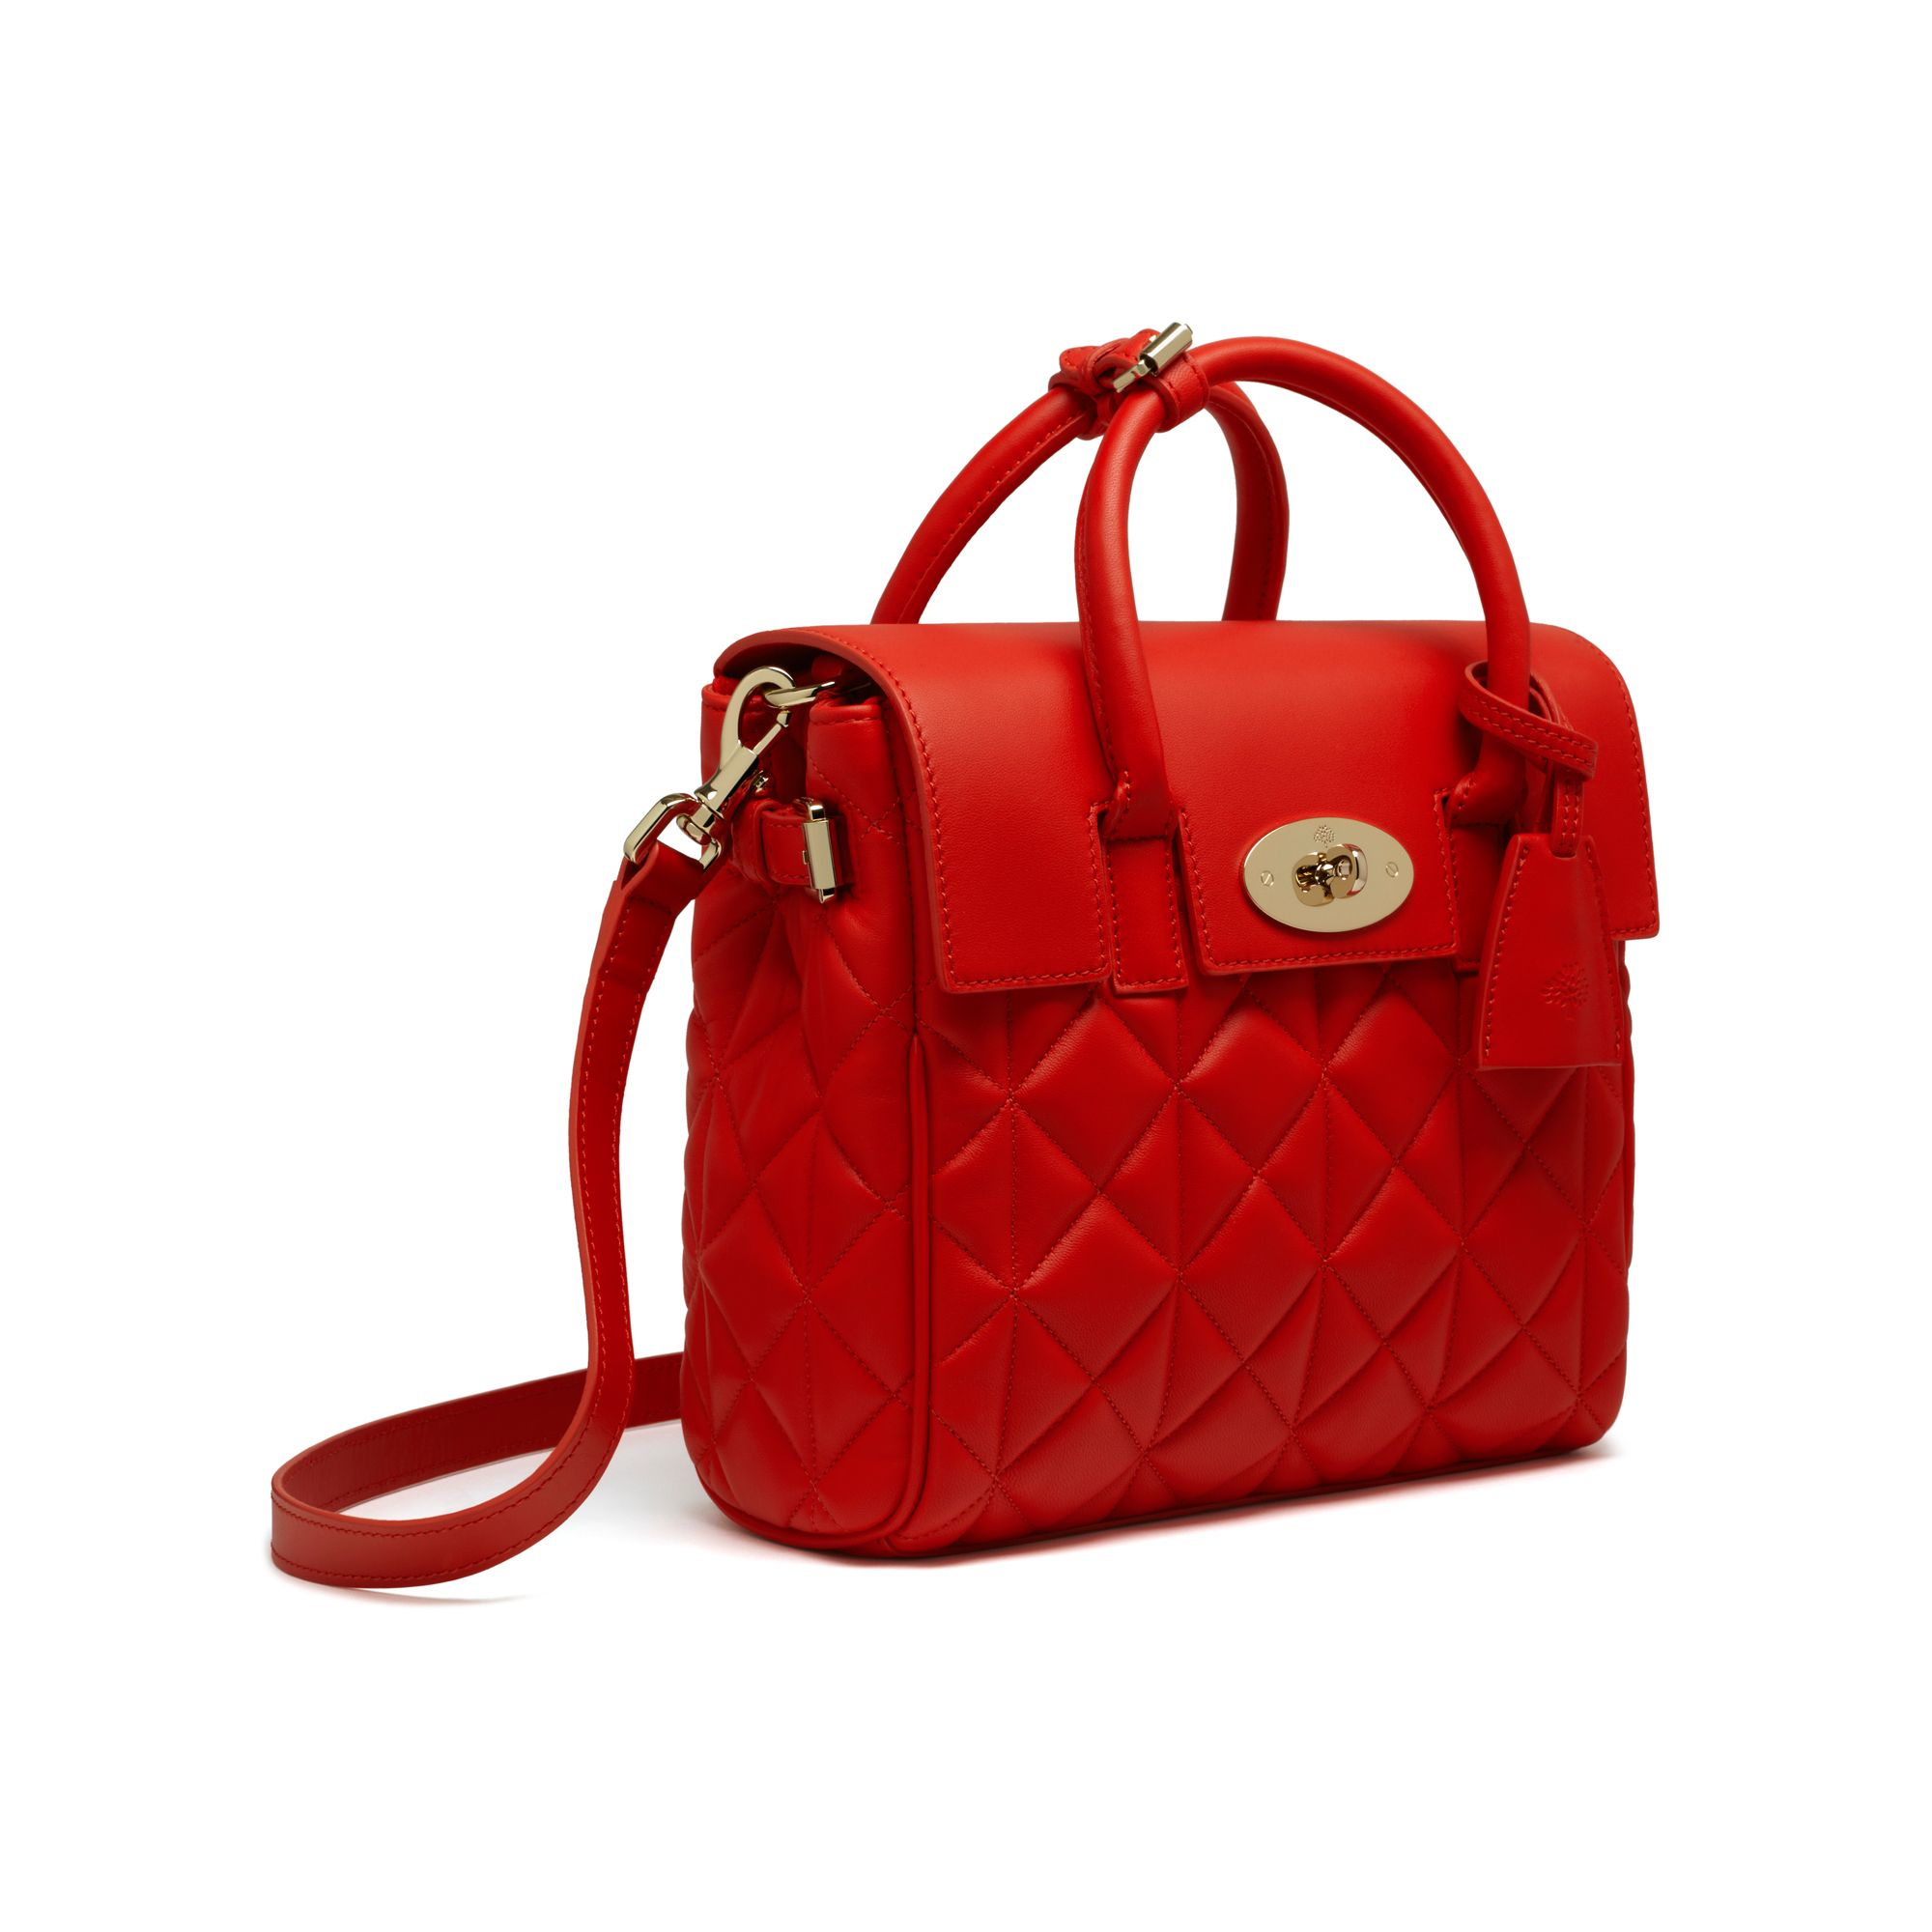 Mulberry Mini Cara Delevingne Bag in Red | Lyst